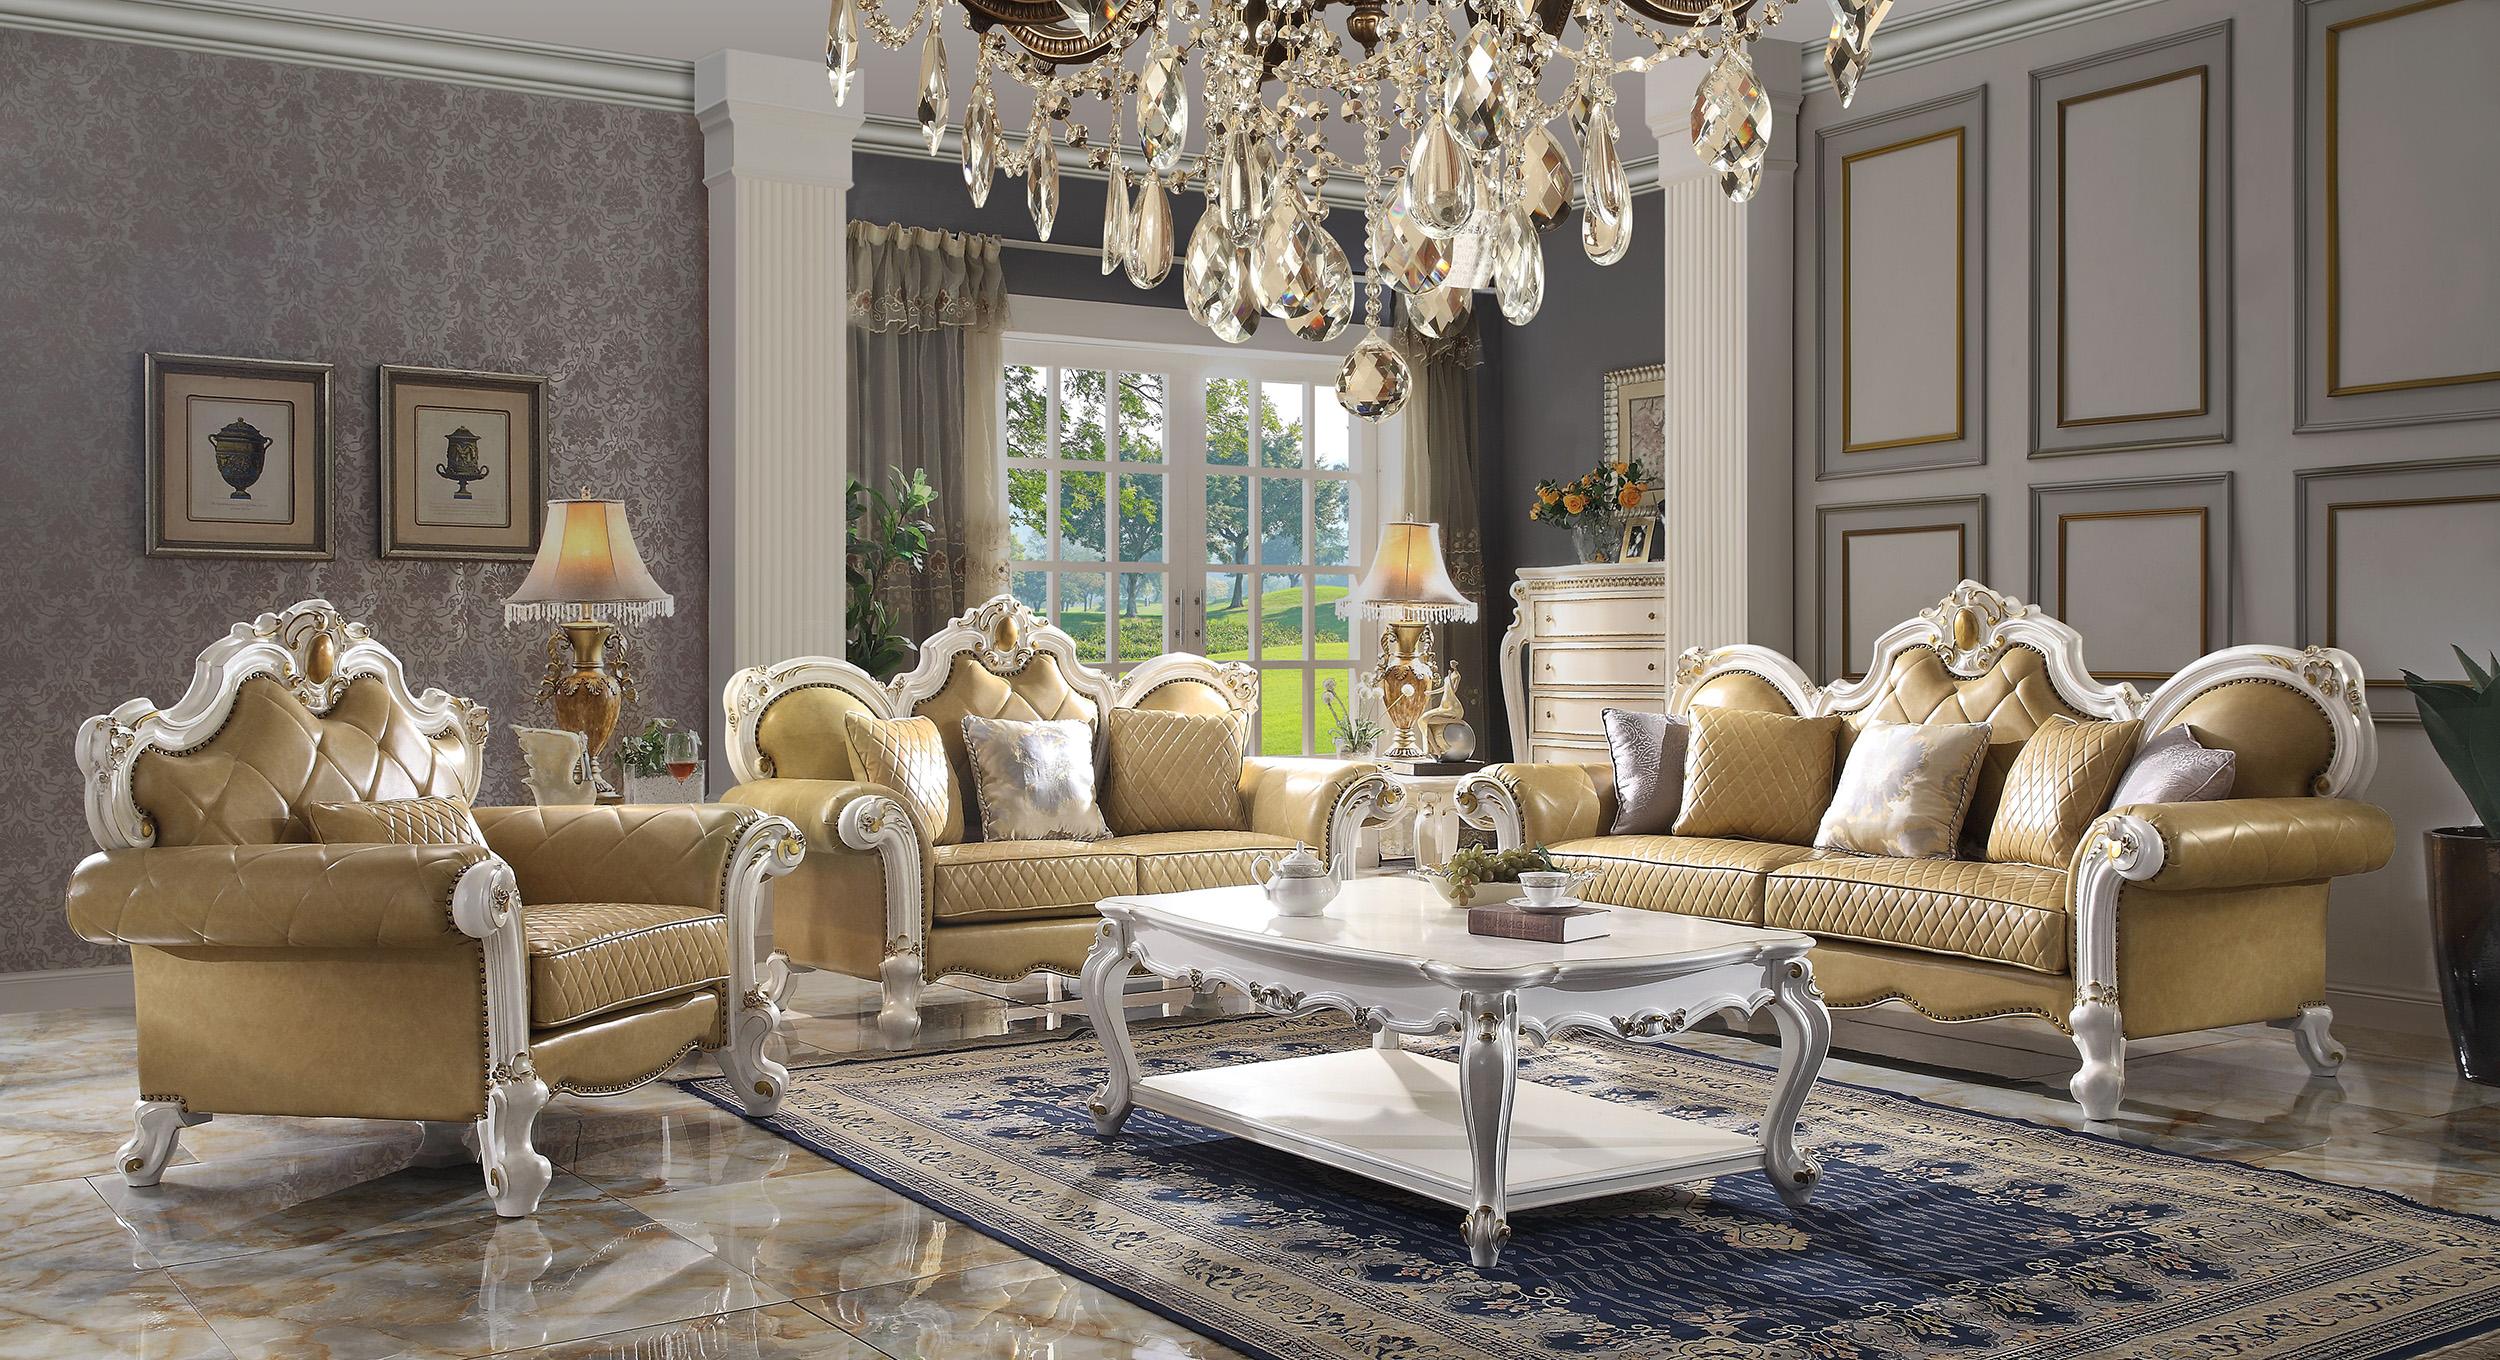 Classic, Traditional Sofa Set Picardy 58210 58210-Set-3 Picardy in Pearl, Antique, Yellow PU